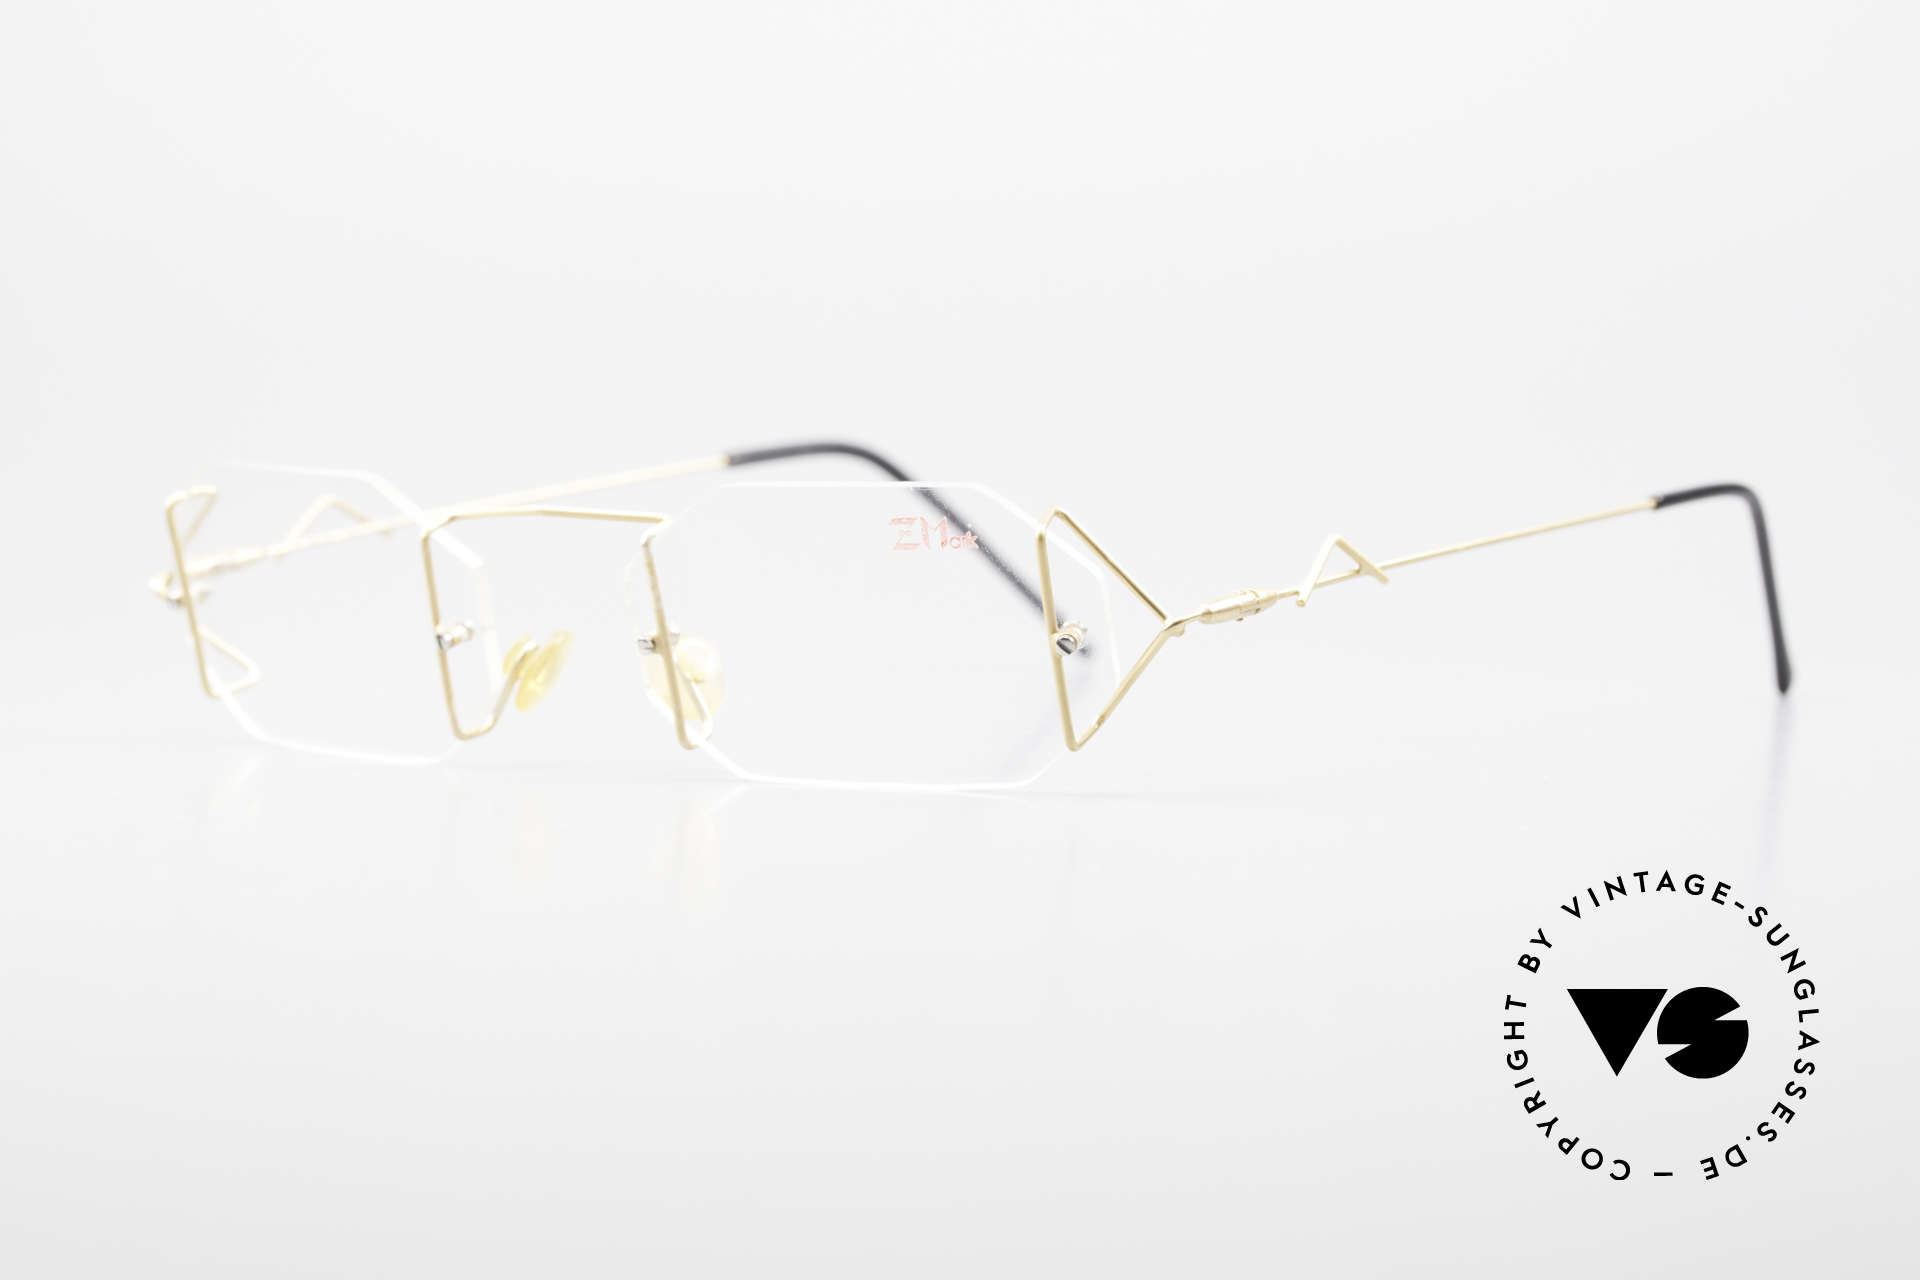 Z Mark 9 Artful 90's Rimless Eyeglasses, an unworn masterpiece with orig. DEMO lenses, Made for Men and Women